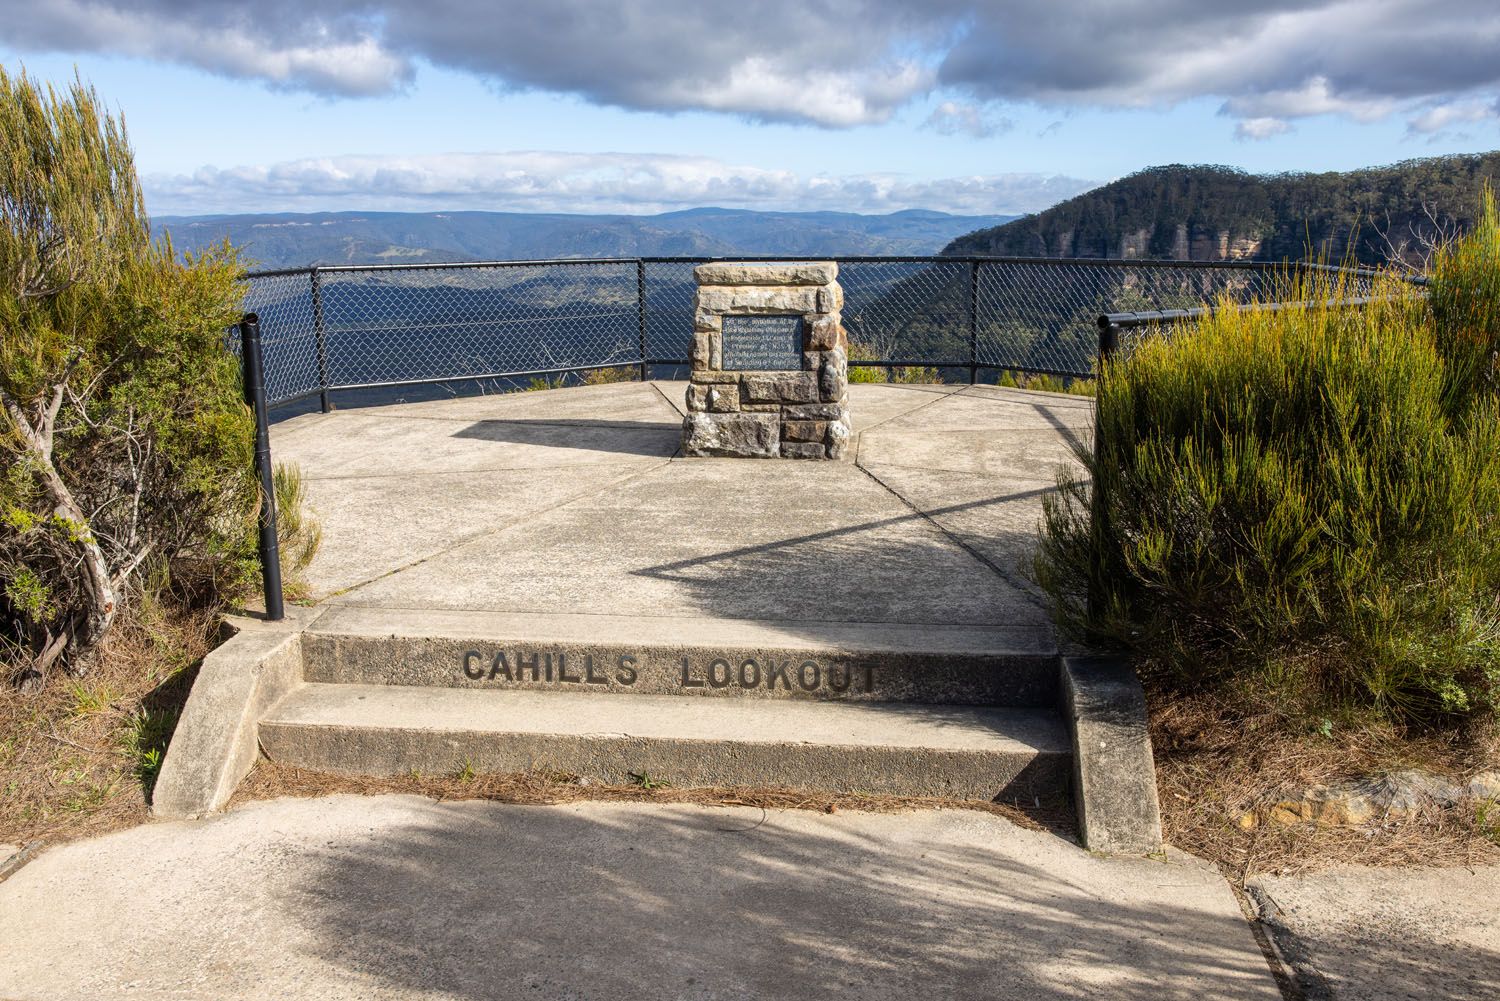 Cahills Lookout | Best Things to Do in the Blue Mountains